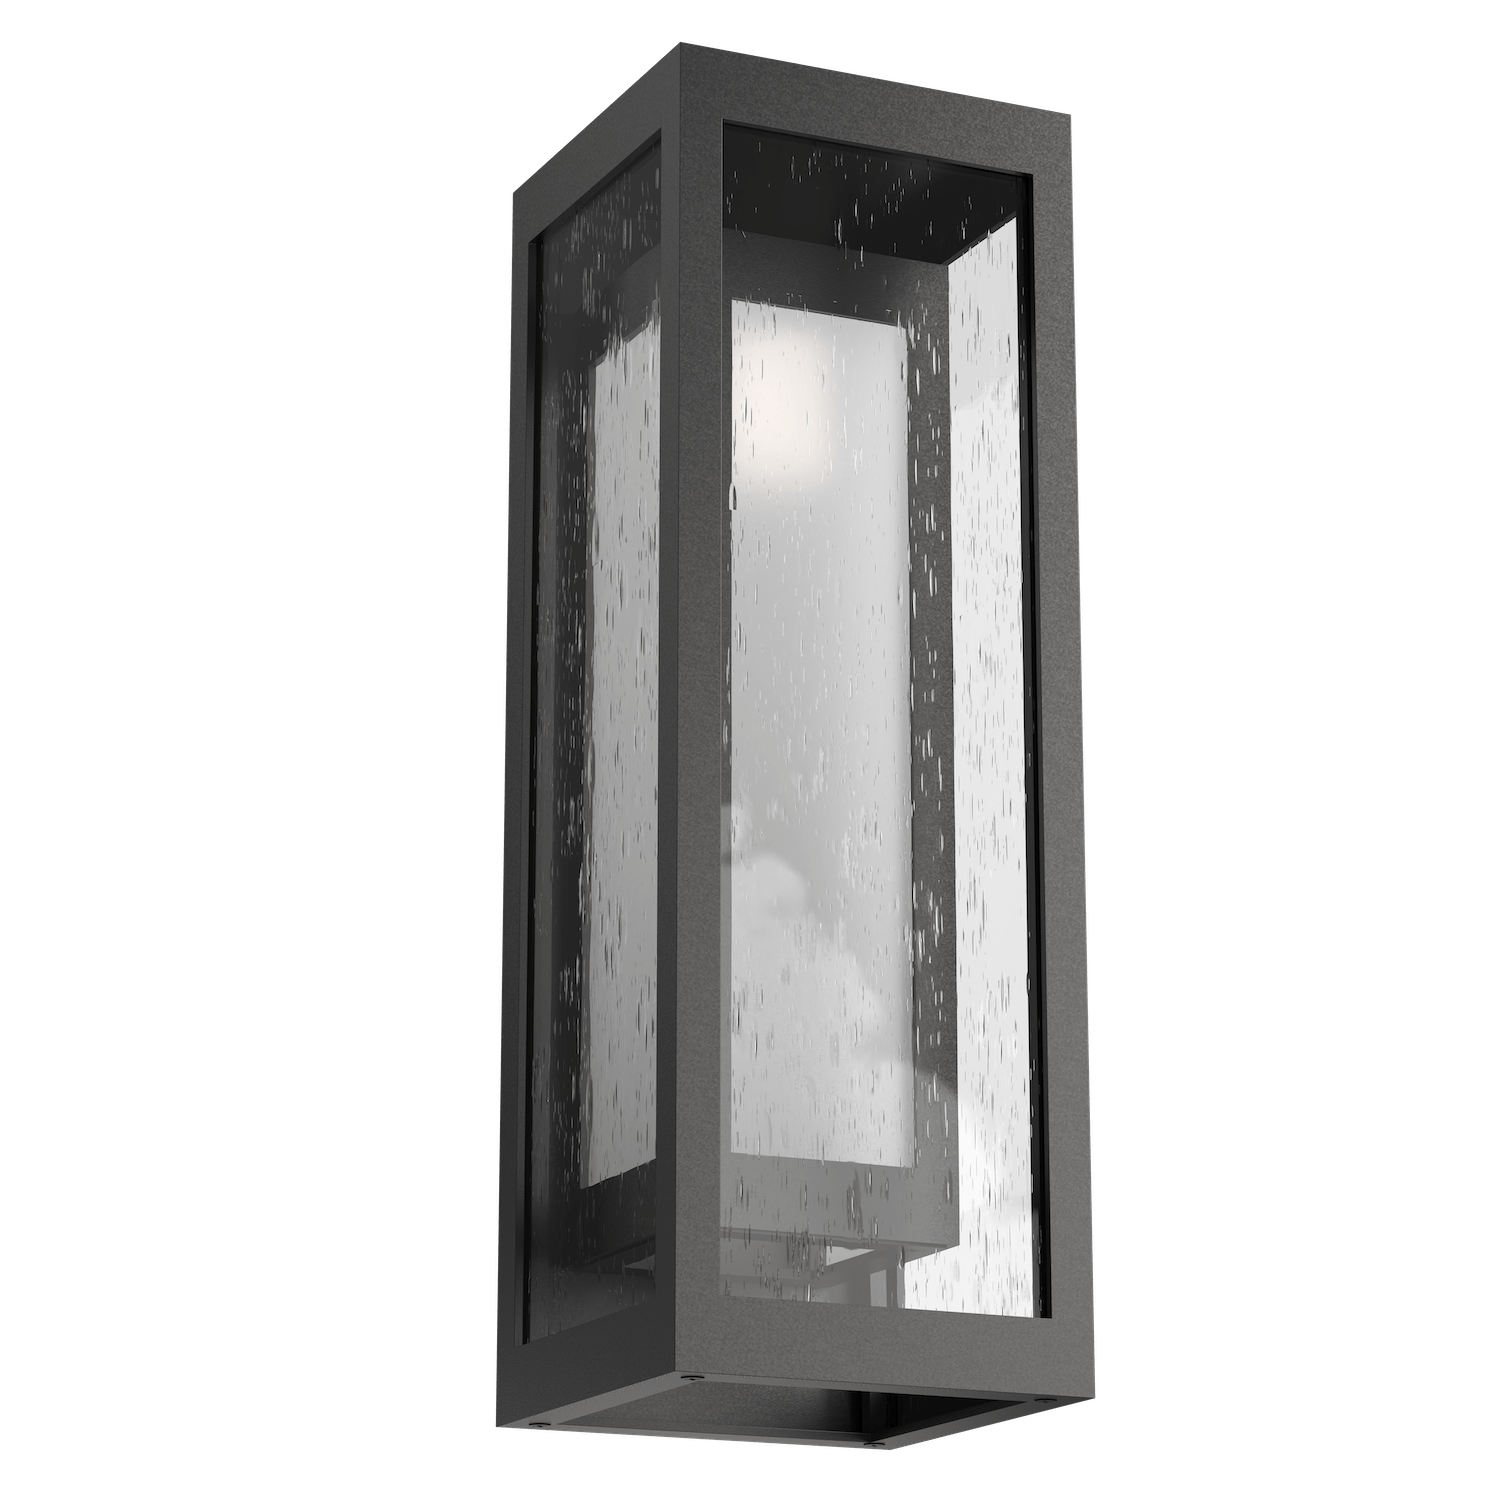 ODB0027-18-AG-F-Hammerton-Studio-Double-Box-18-inch-outdoor-sconce-with-argento-grey-finish-and-frosted-glass-shade-and-LED-lamping